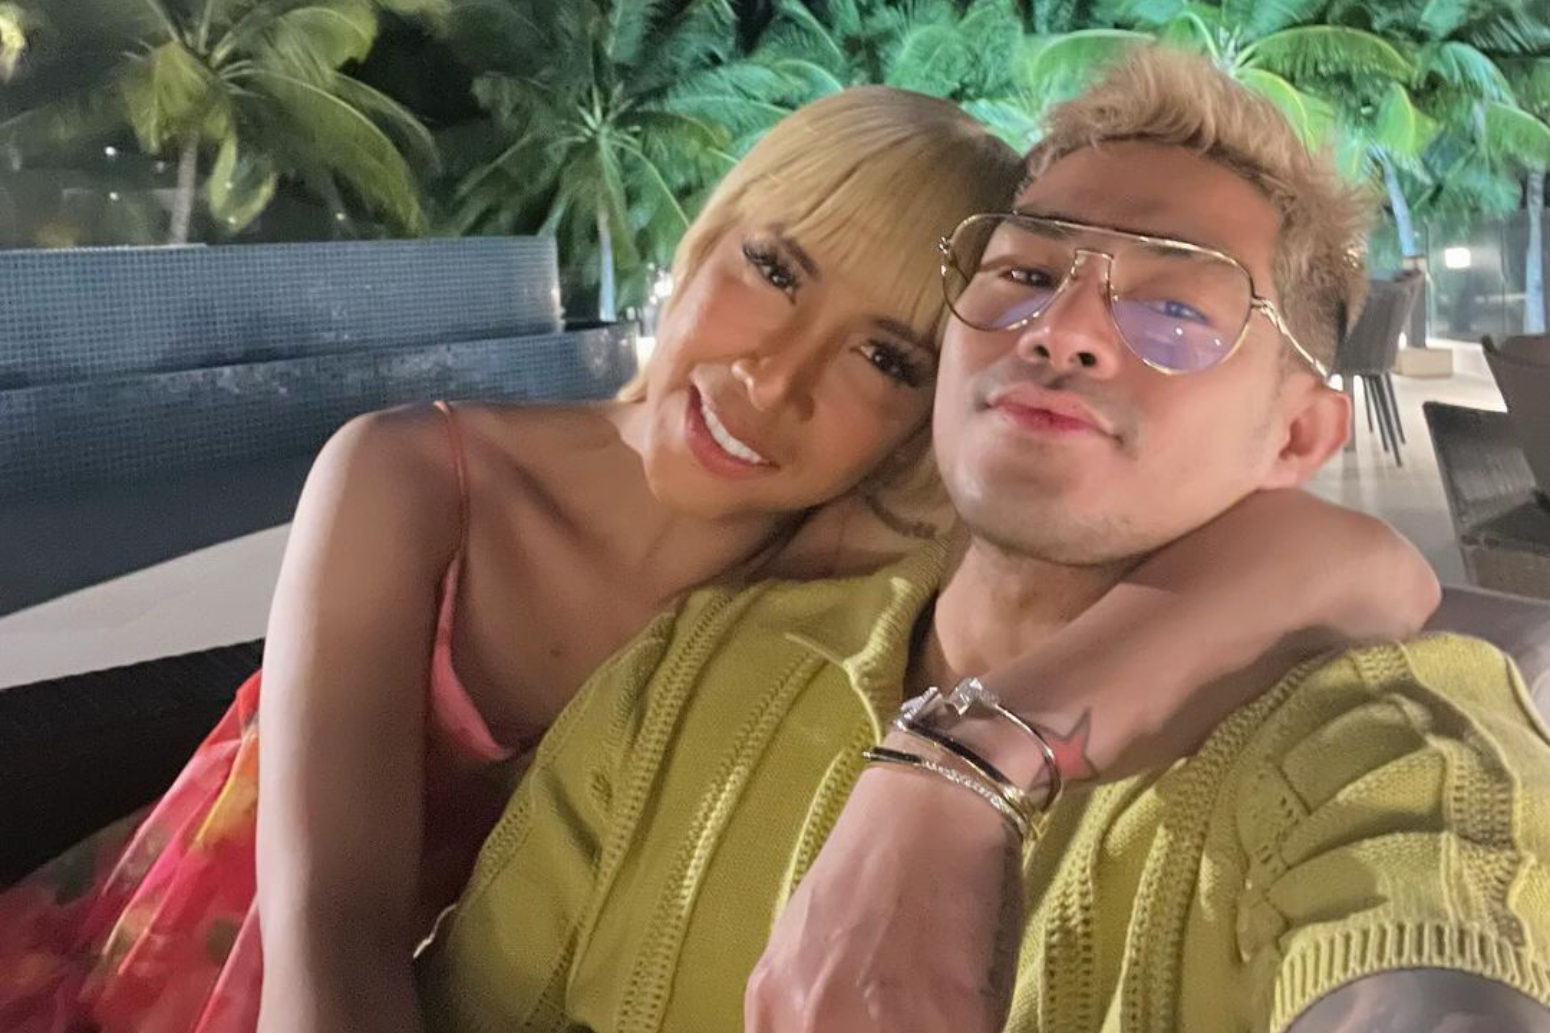 Ion Perez vows to love Vice Ganda ‘until 2090’ in New Year post Vice Ganda and Ion Perez. Image: Instagram/@pereziion27